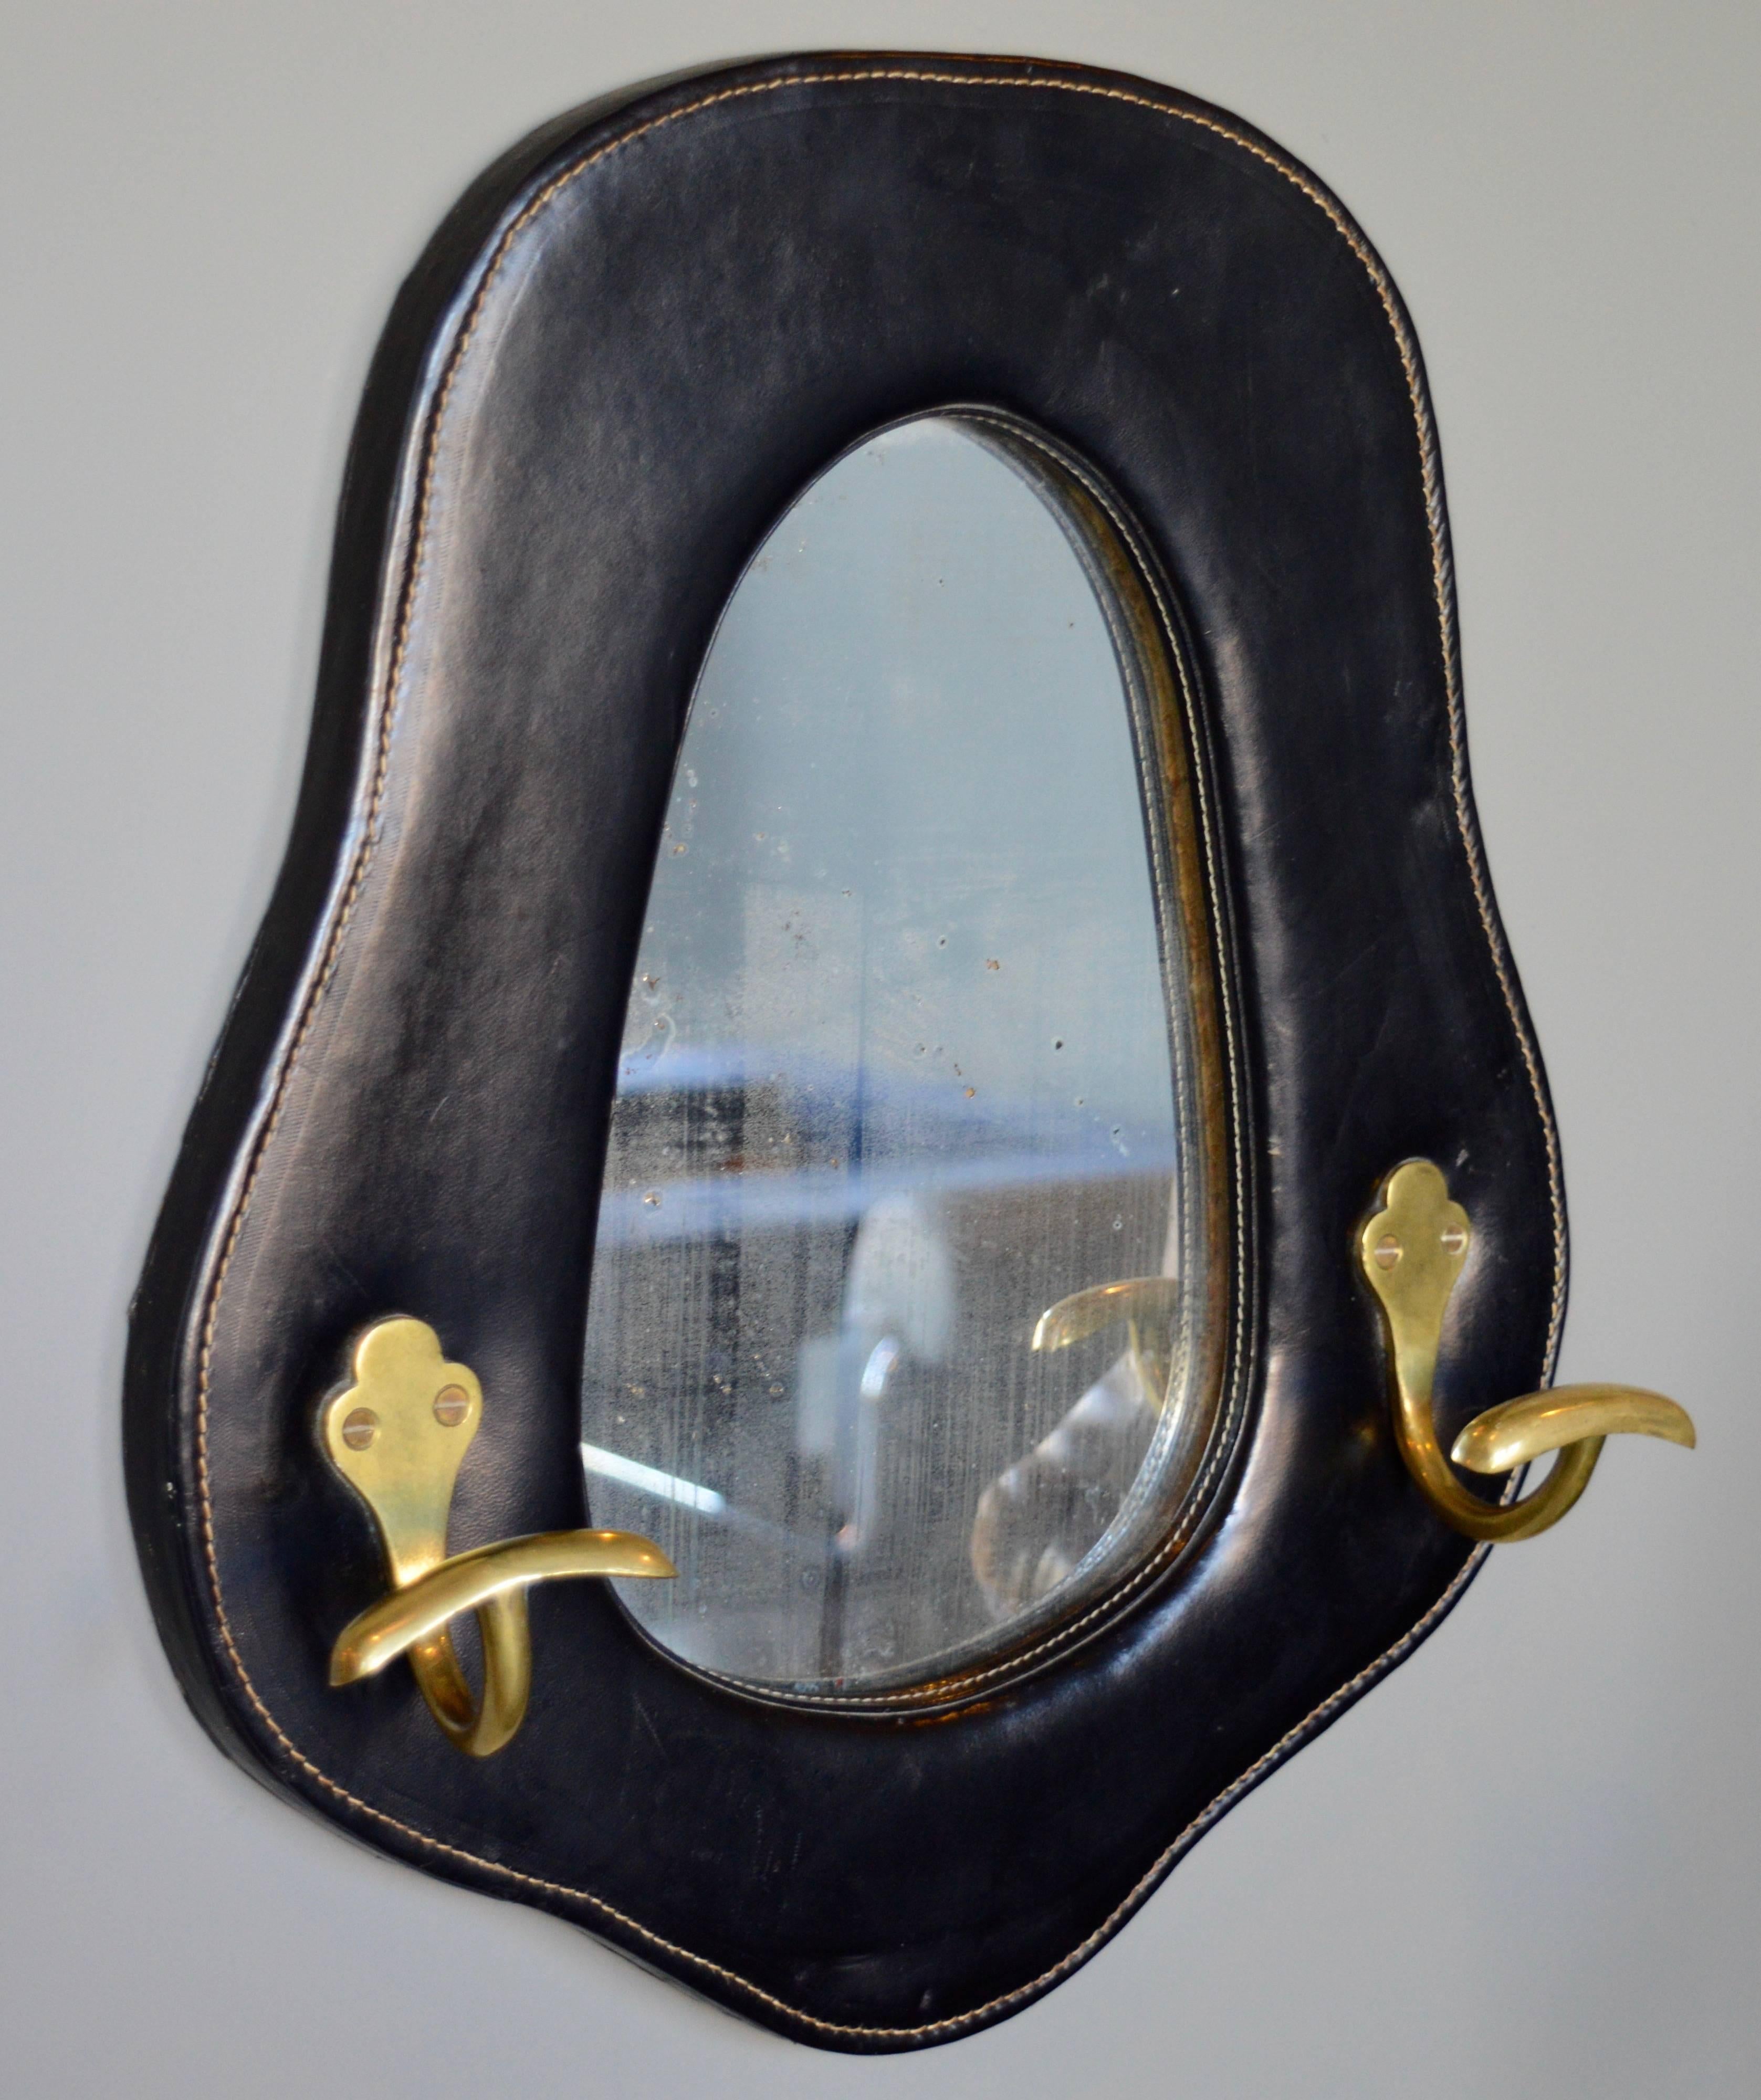 Handsome leather and brass mirror by French designer Jacques Adnet. Signature Adnet contrast stitching and excellent patina to black leather. Mirror is naturally aged and looks great. Excellent vintage condition.